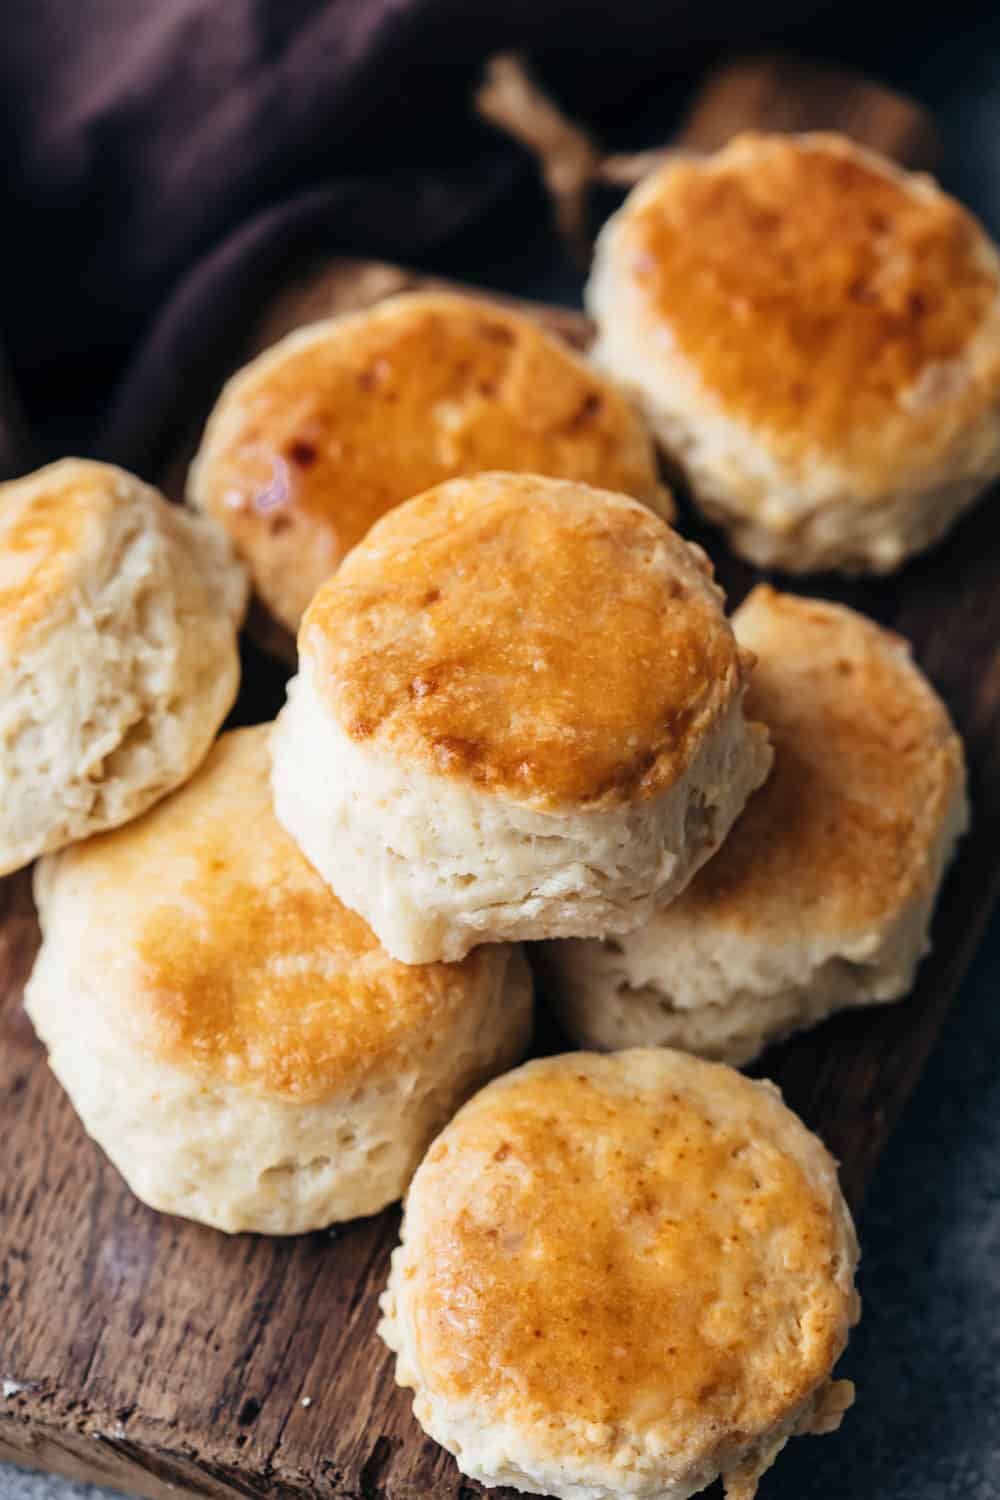 Buttermilk biscuits piled one on top of the other